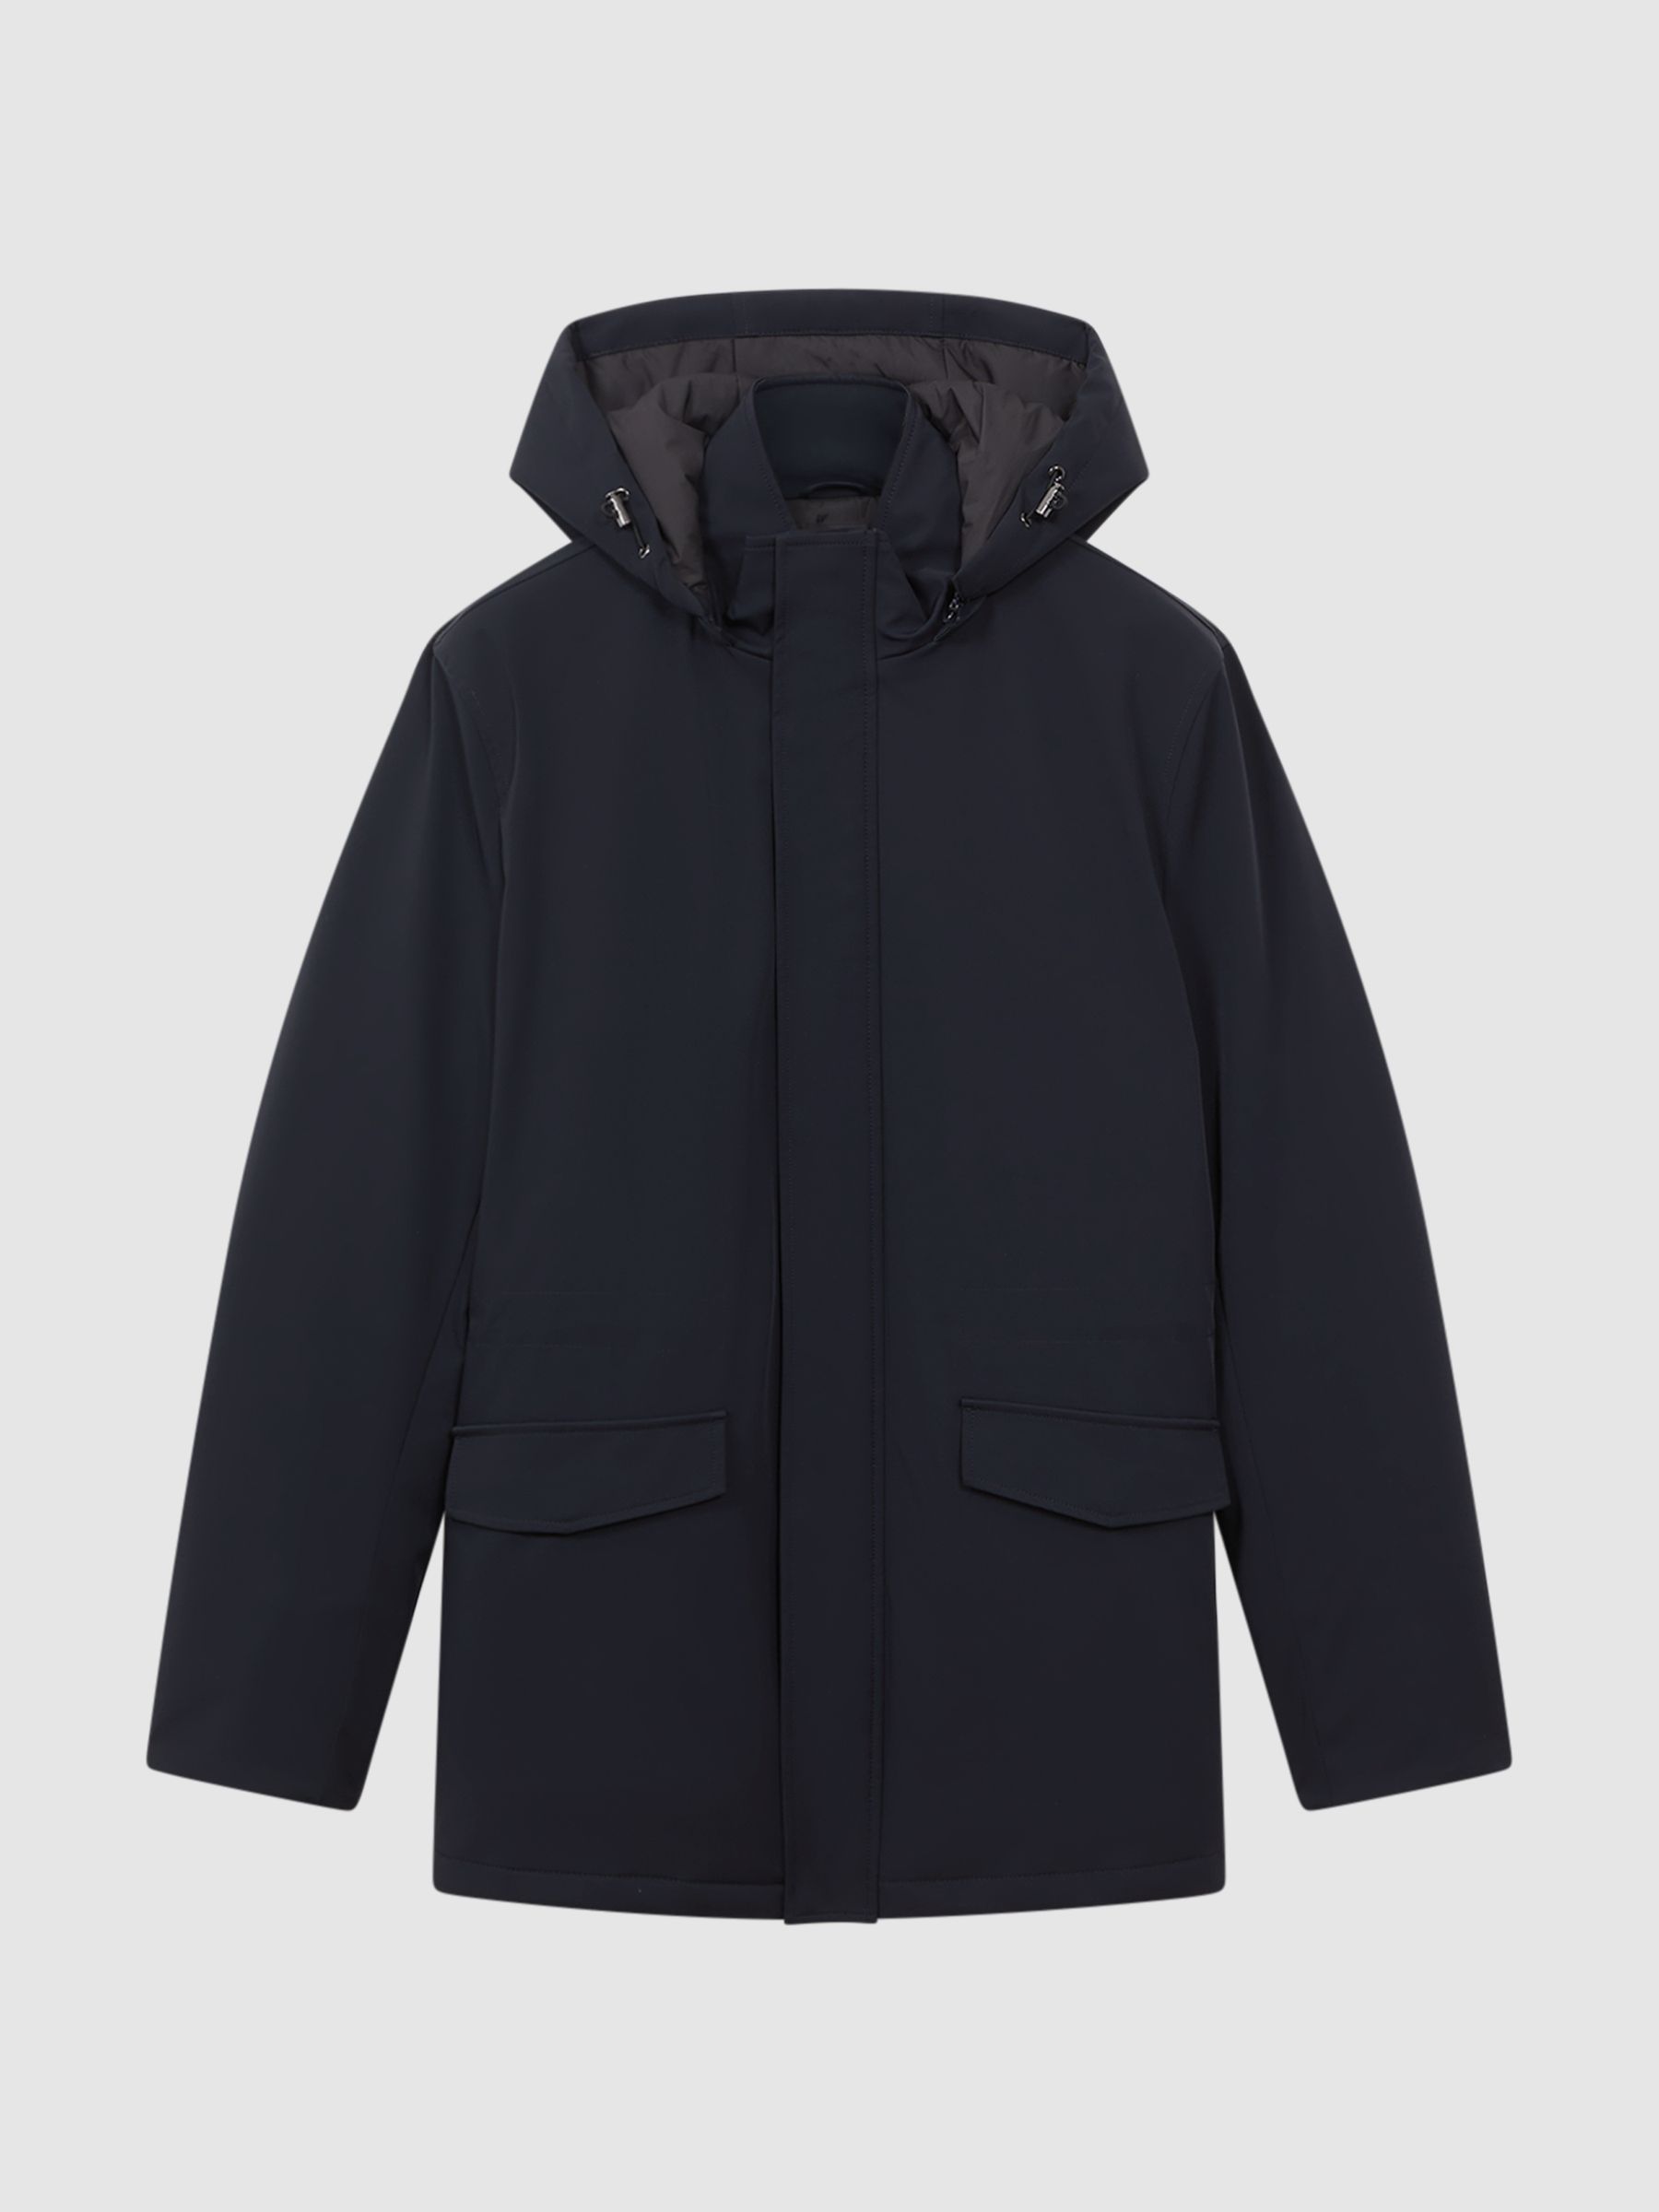 Reiss Dublin Water Repellent Removable Hooded Coat | REISS USA